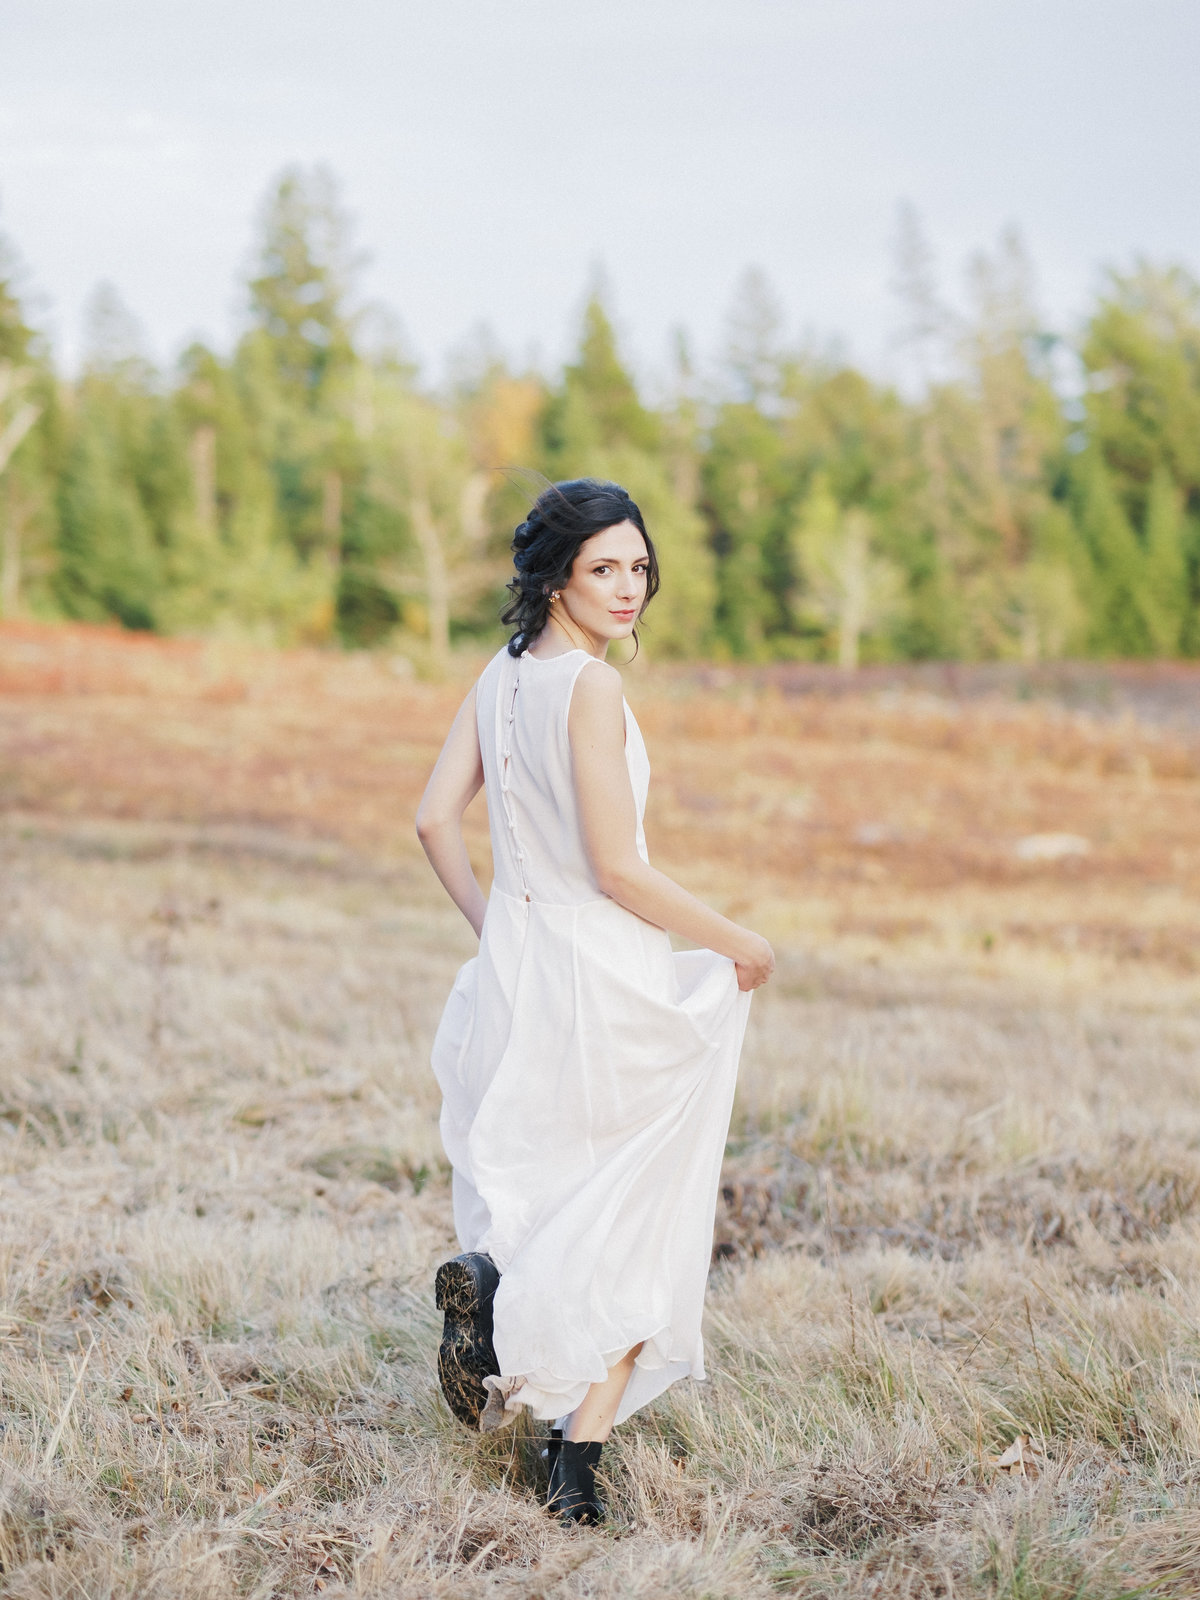 Jacqueline Anne Photography - Mount Uniacke Editorial-28